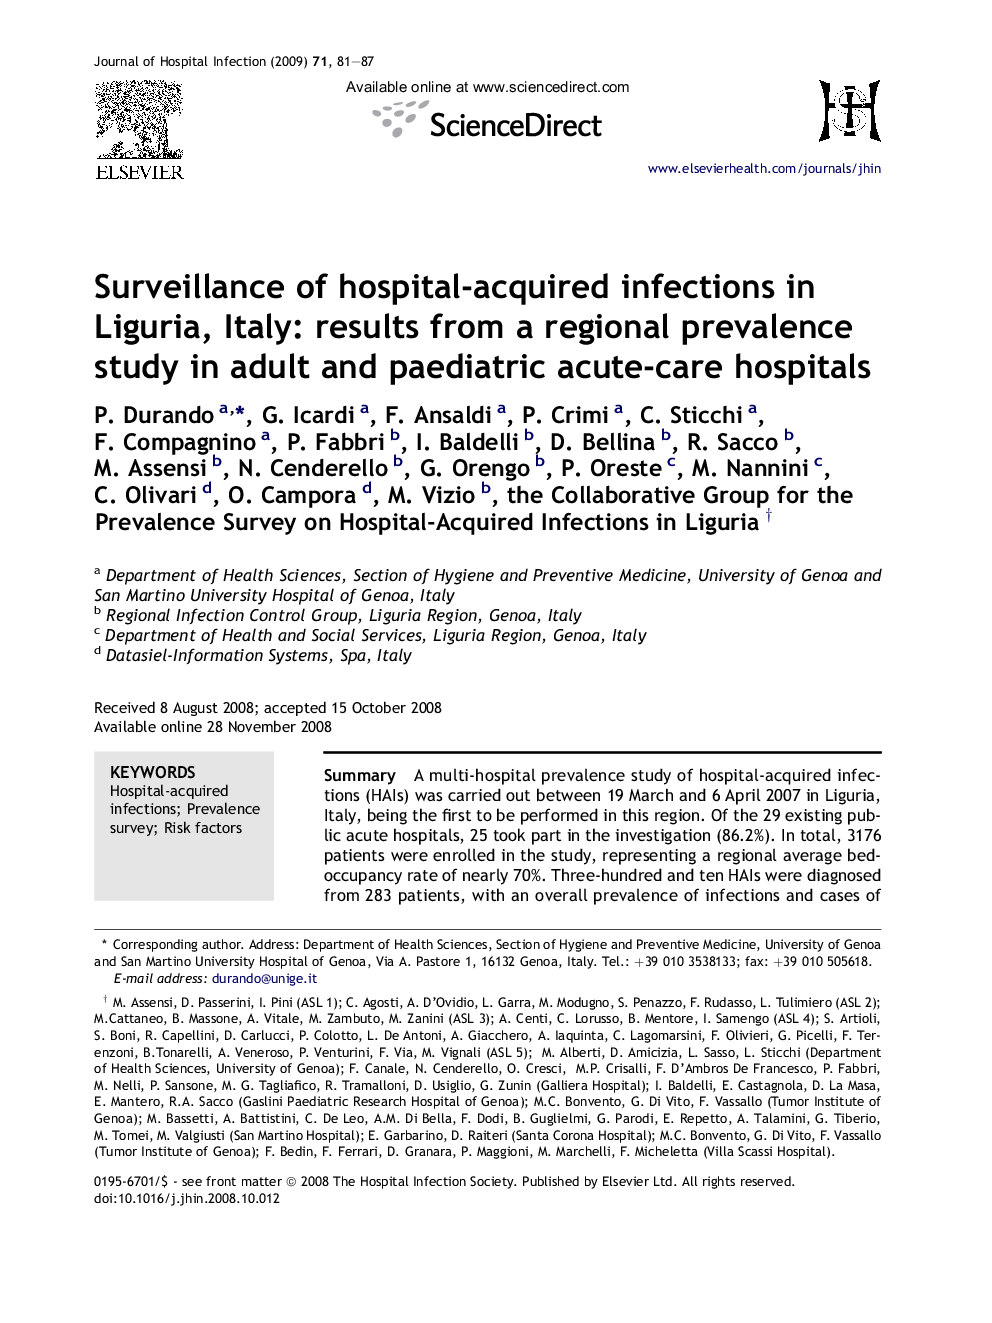 Surveillance of hospital-acquired infections in Liguria, Italy: results from a regional prevalence study in adult and paediatric acute-care hospitals